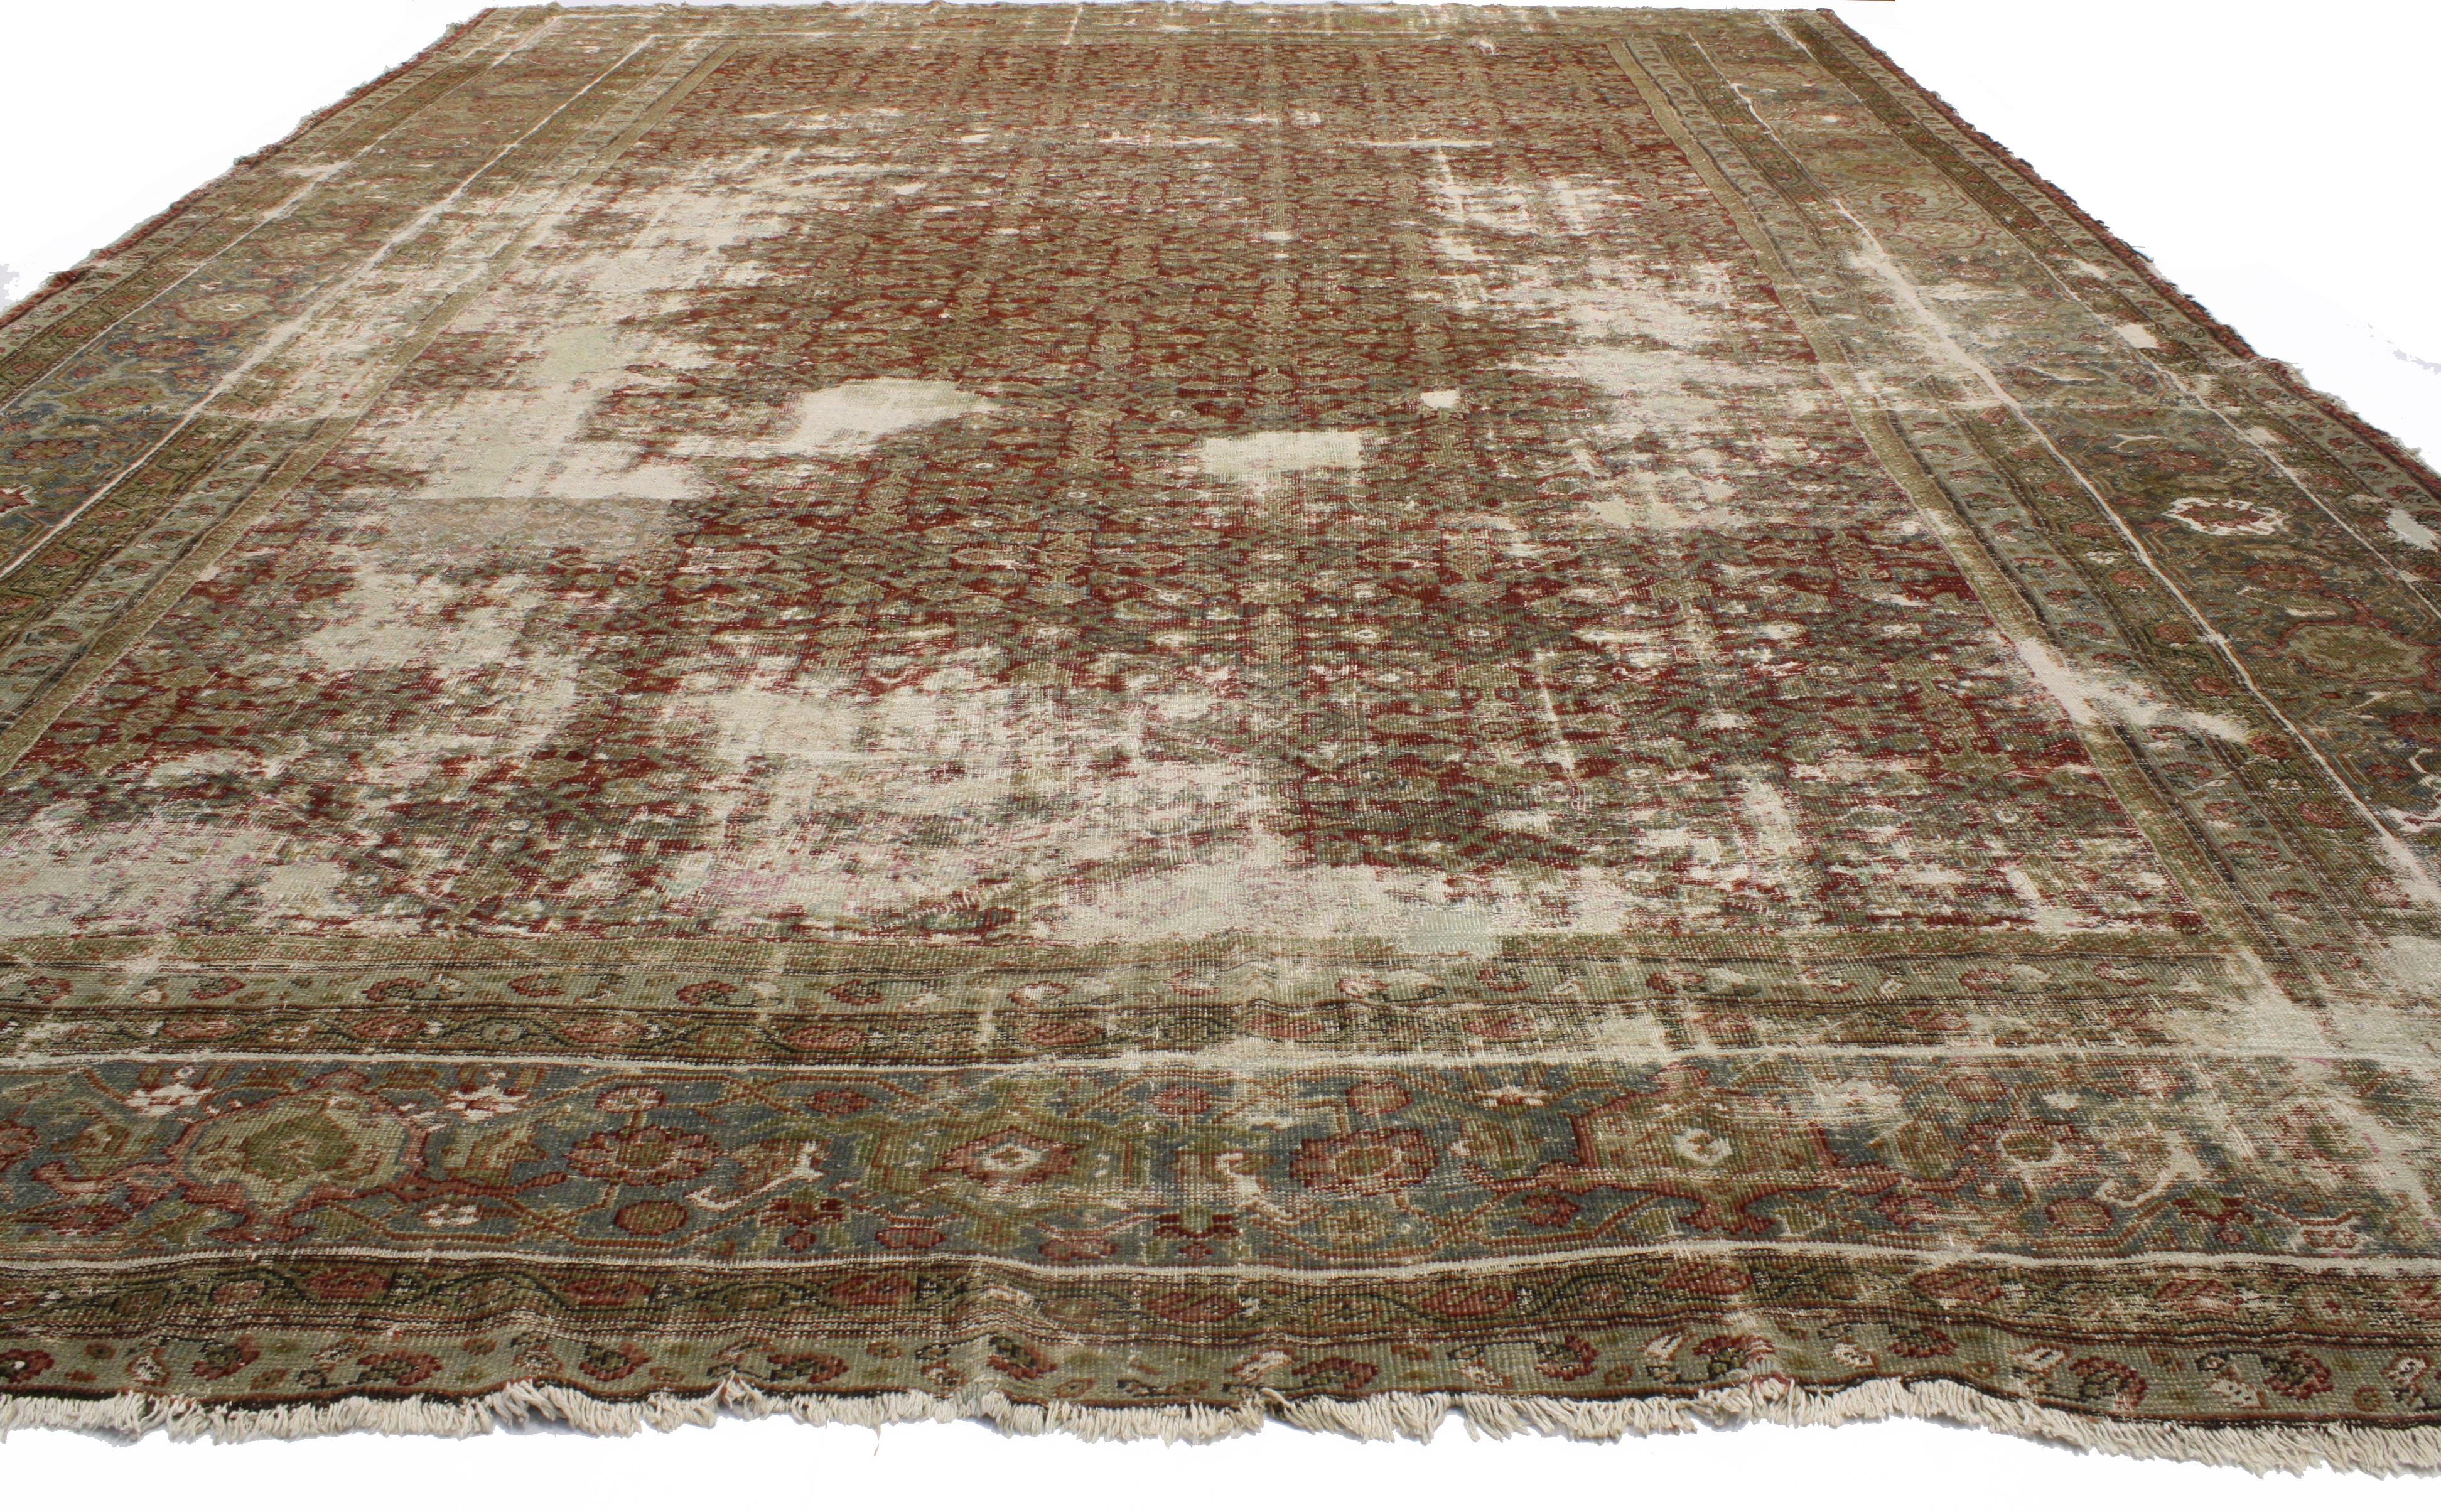 Wool Antique-Worn Persian Sultanabad Rug, Weathered Beauty Meets Rustic Adirondack  For Sale